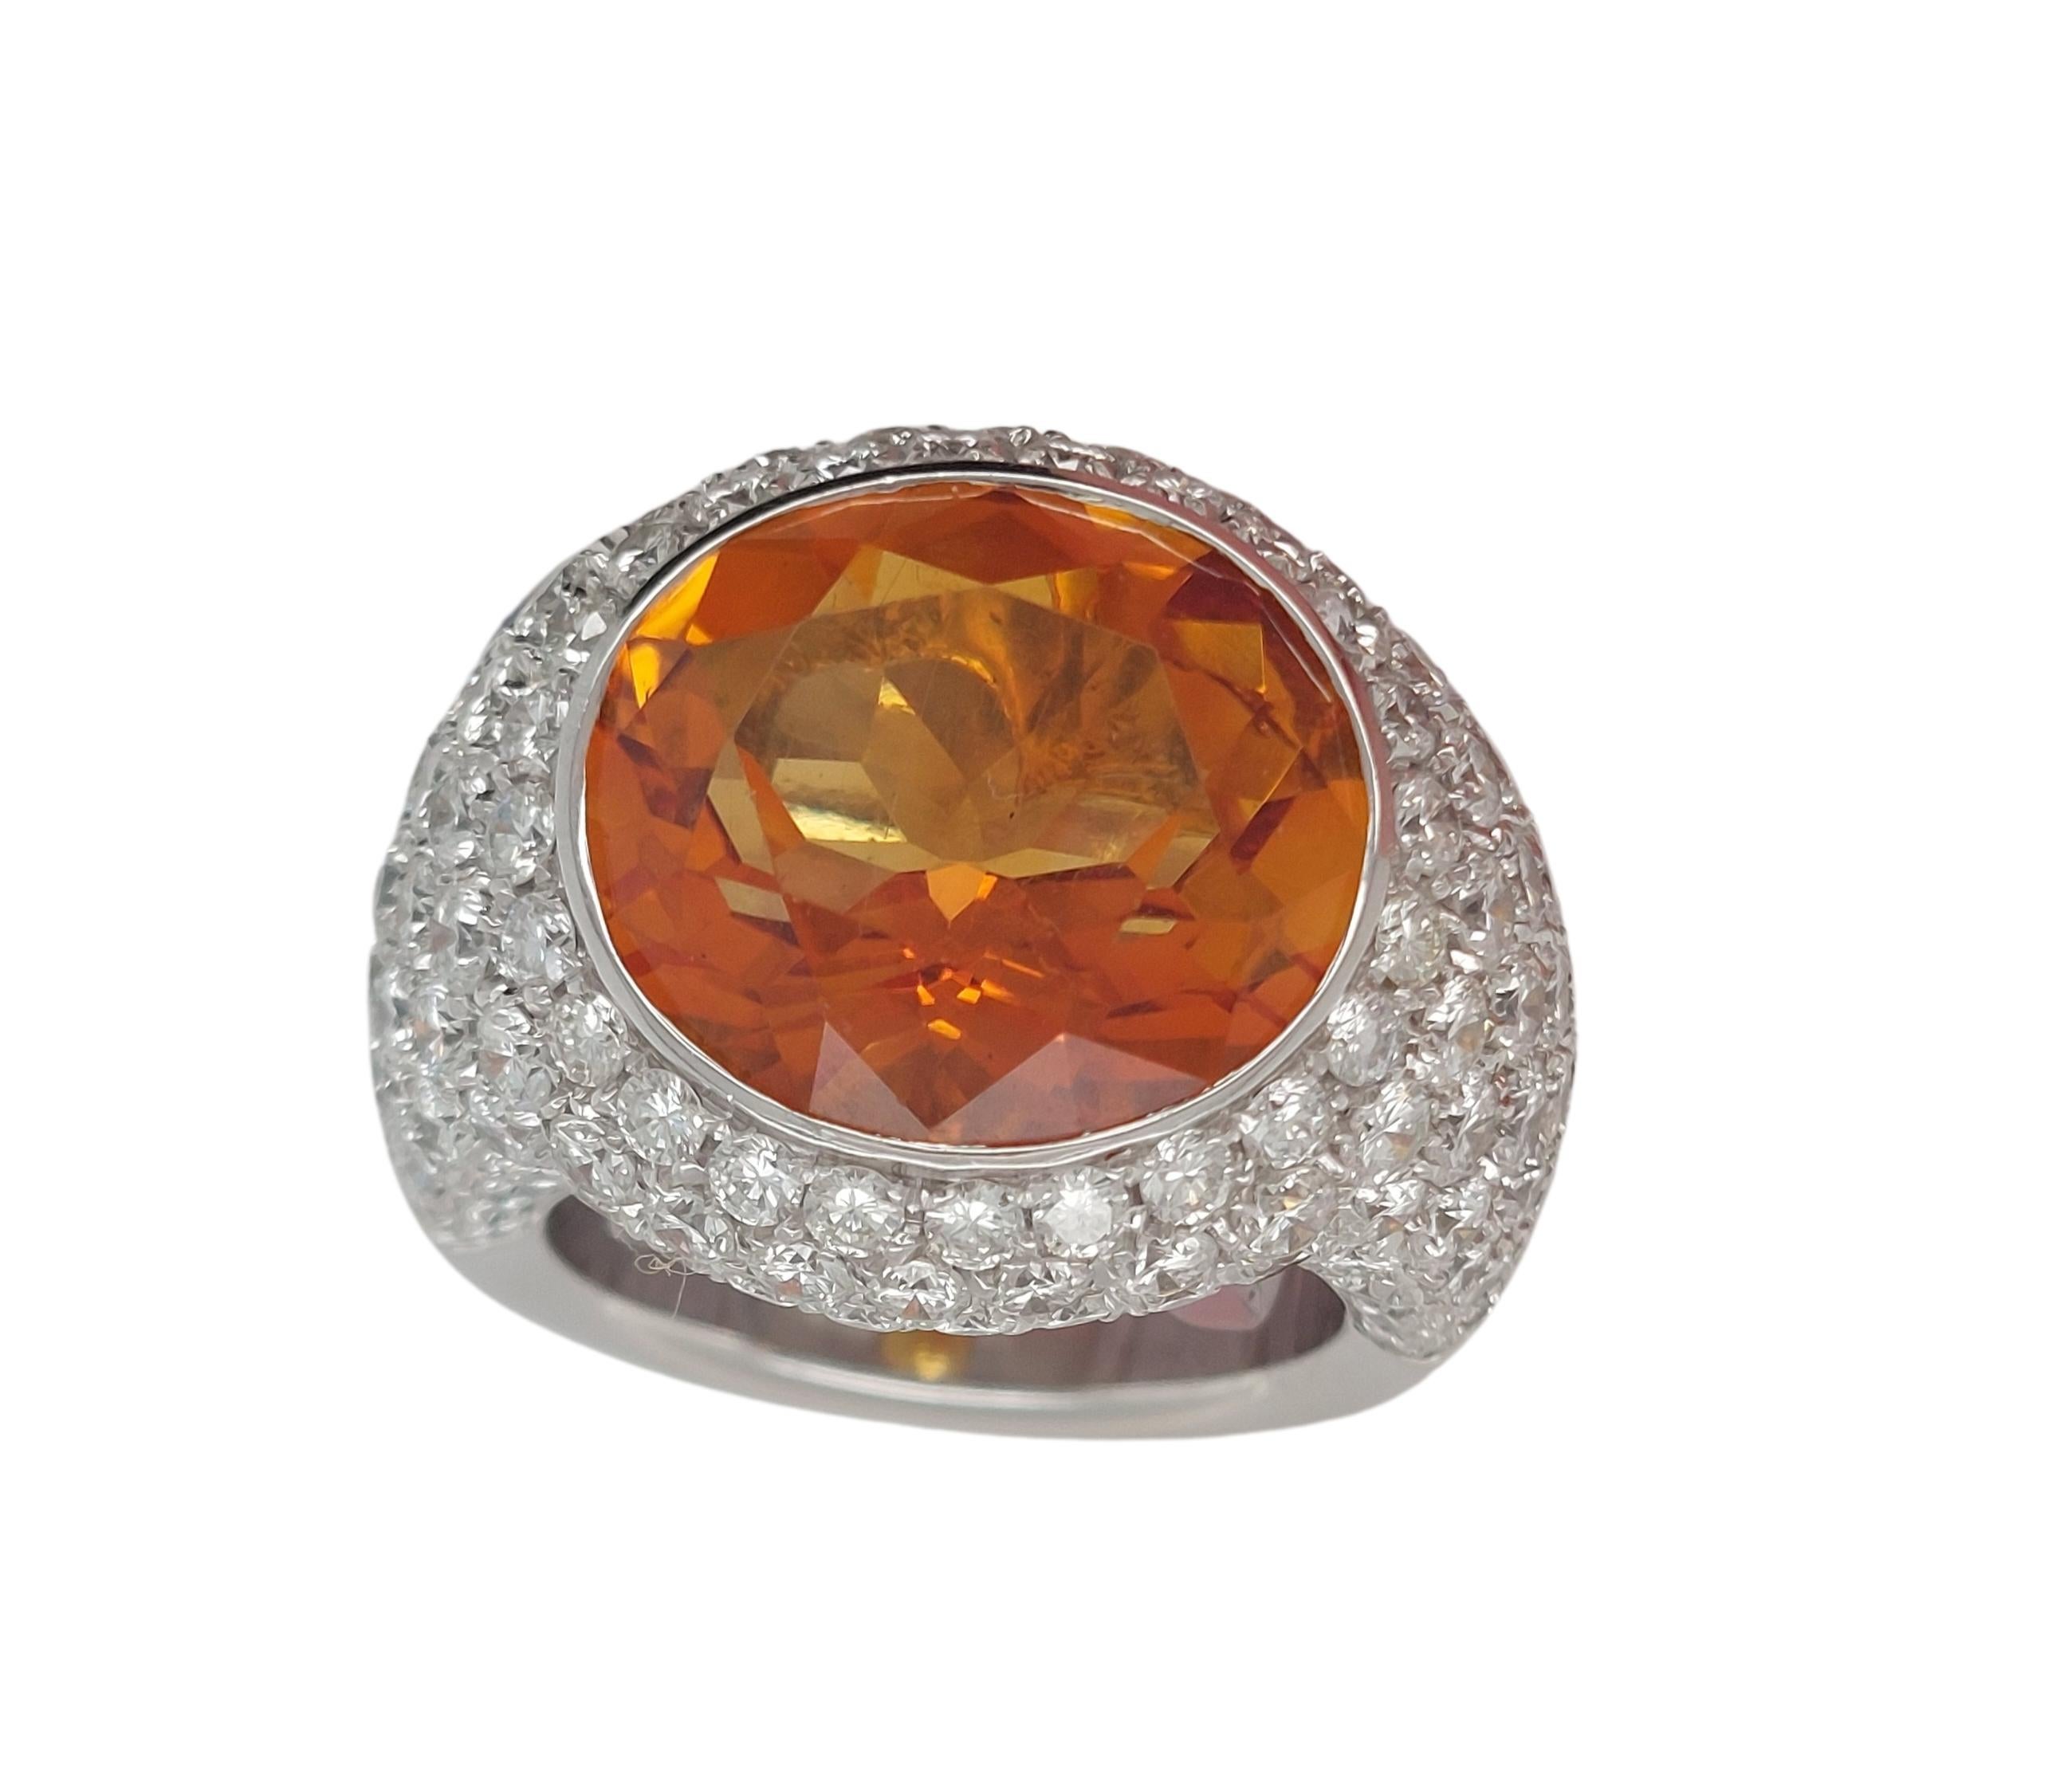 Artisan Stunning 18kt Solid White Gold Ring with 6.4ct Diamonds and Big Citrine Stone For Sale